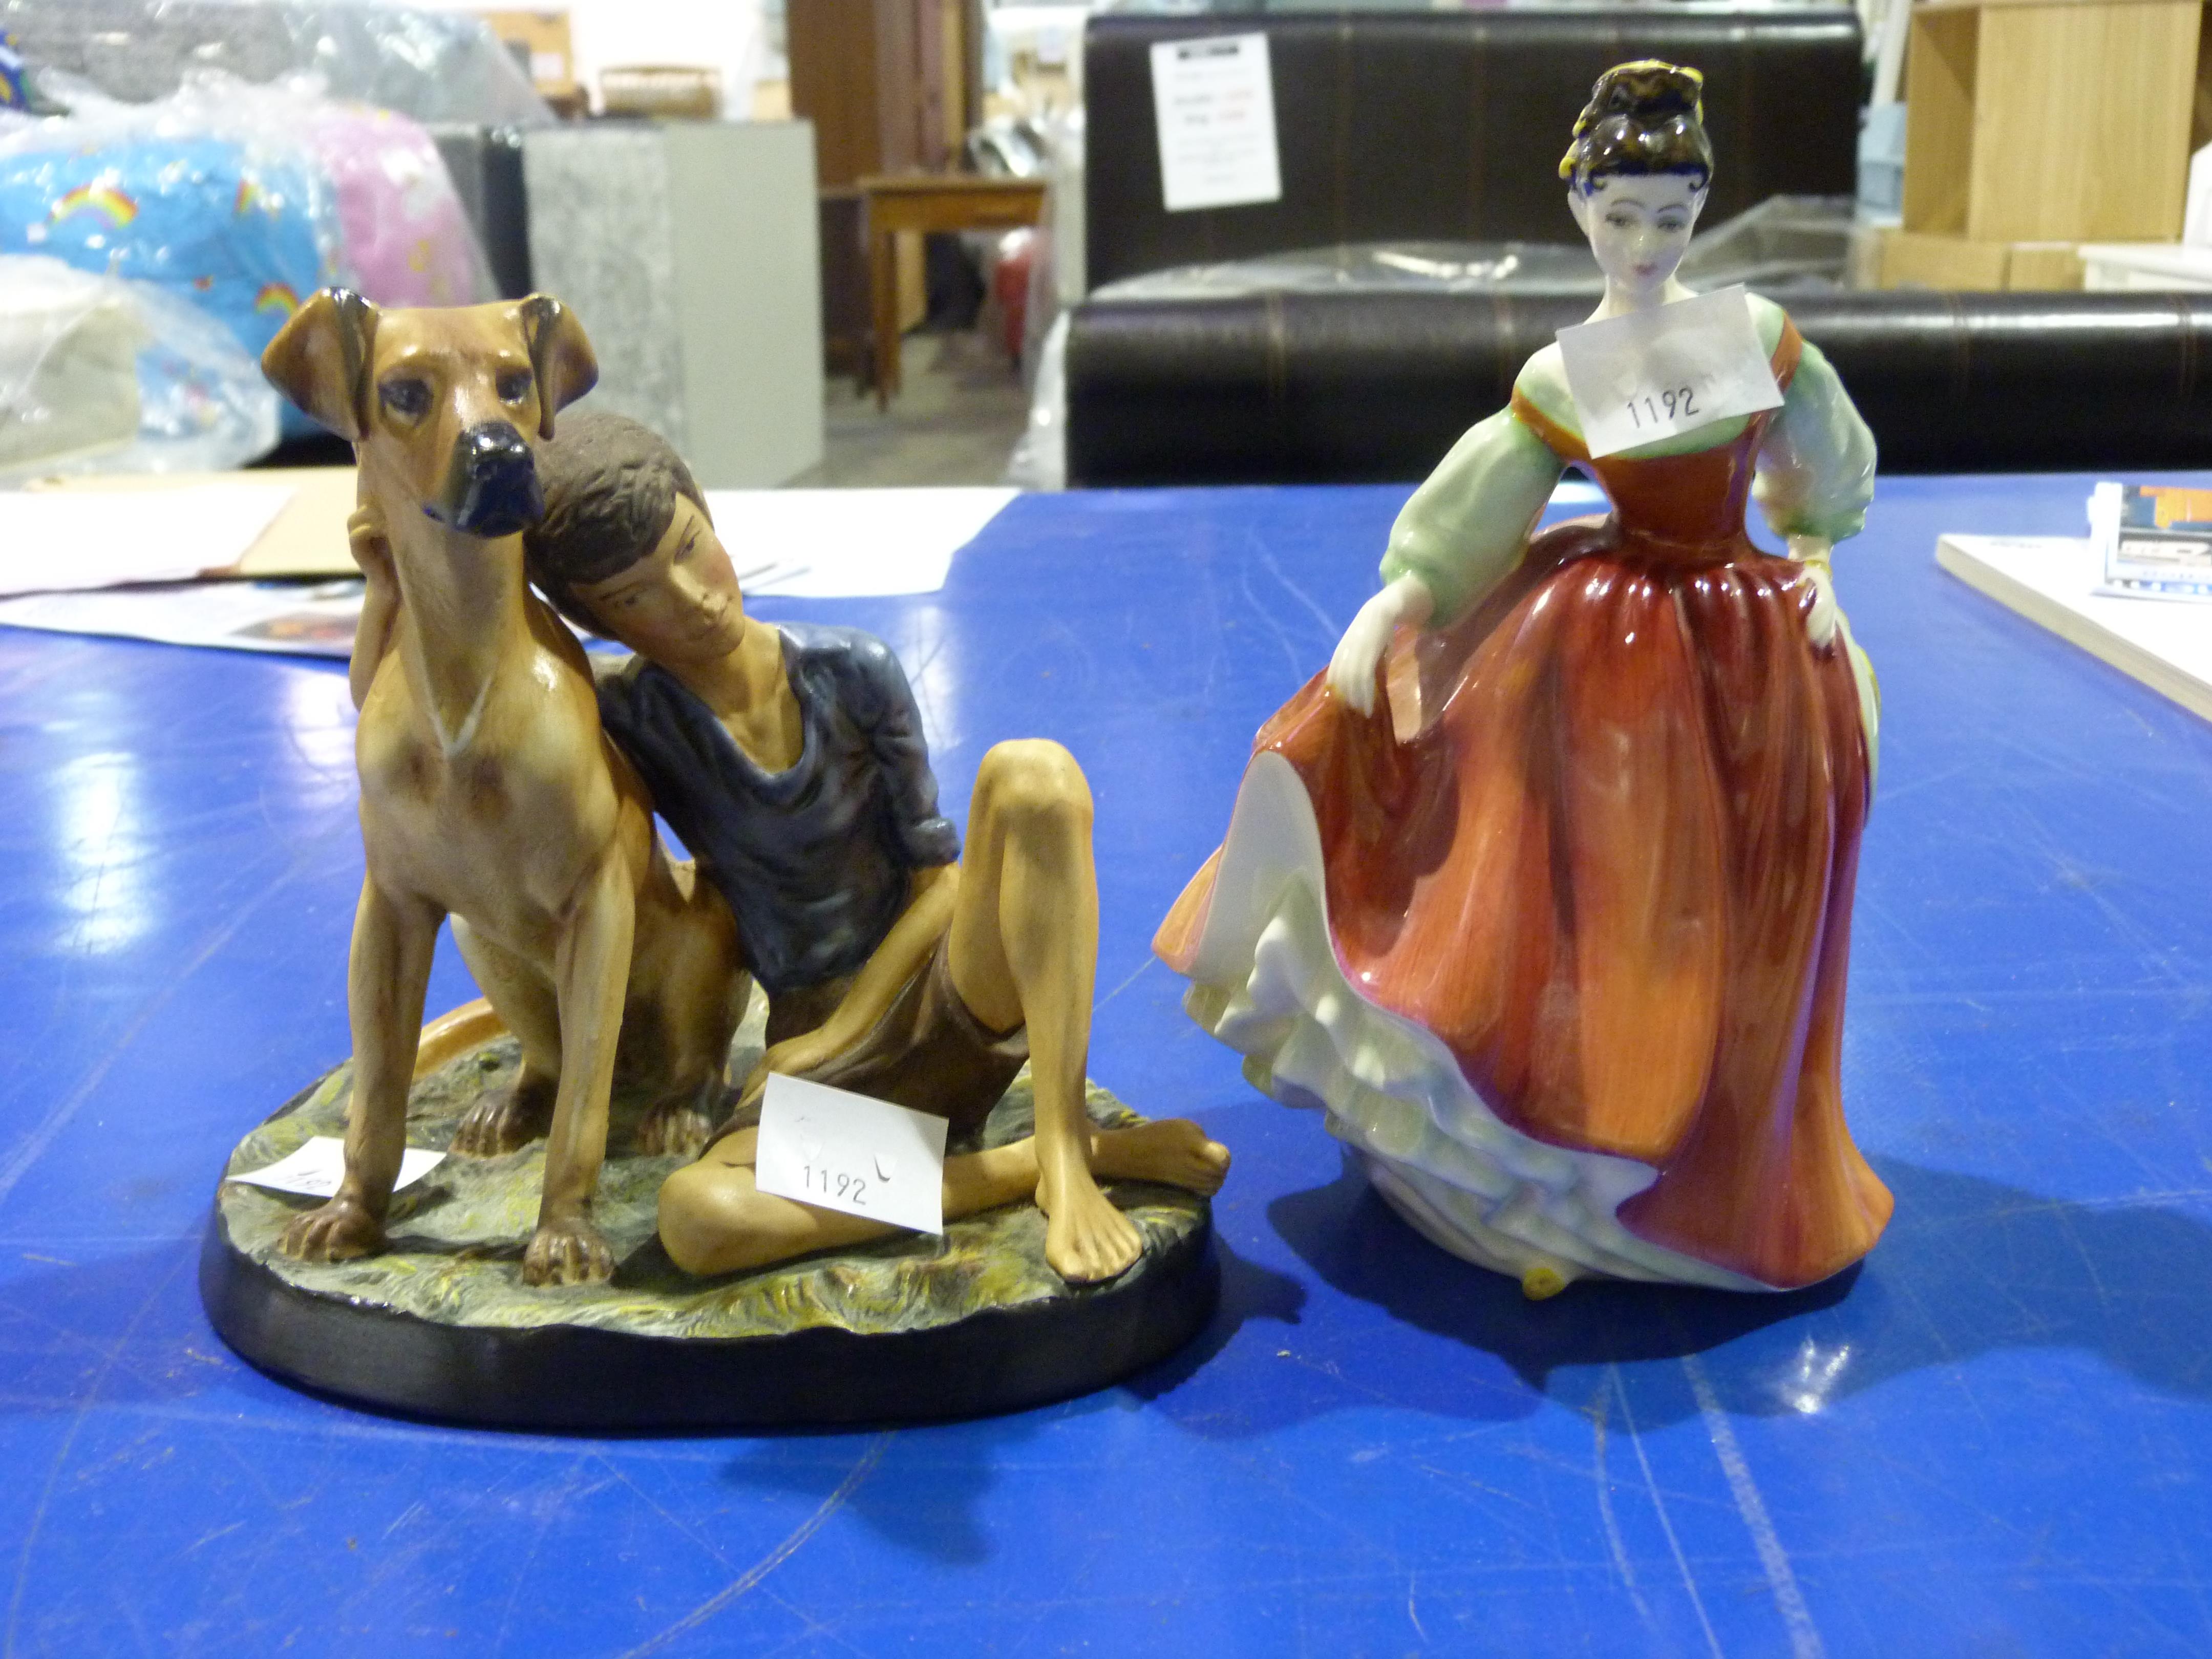 This is a Timed Online Auction on Bidspotter.co.uk, Click here to bid. Royal Doulton limited edition